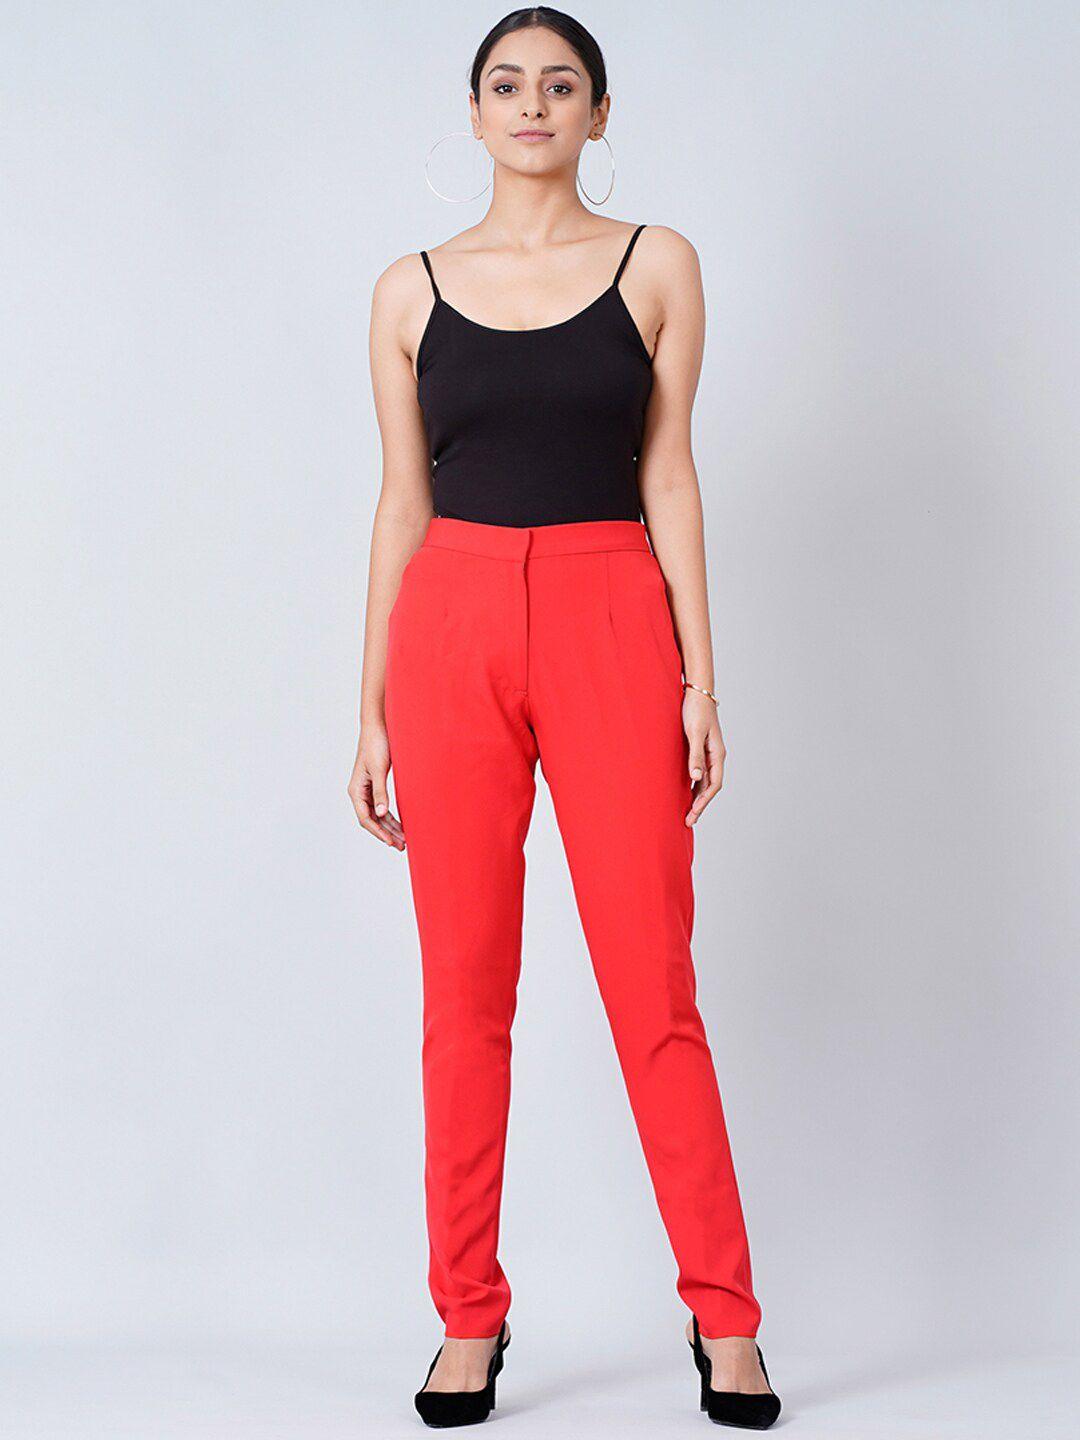 first resort by ramola bachchan women mid-rise smart slim fit trousers